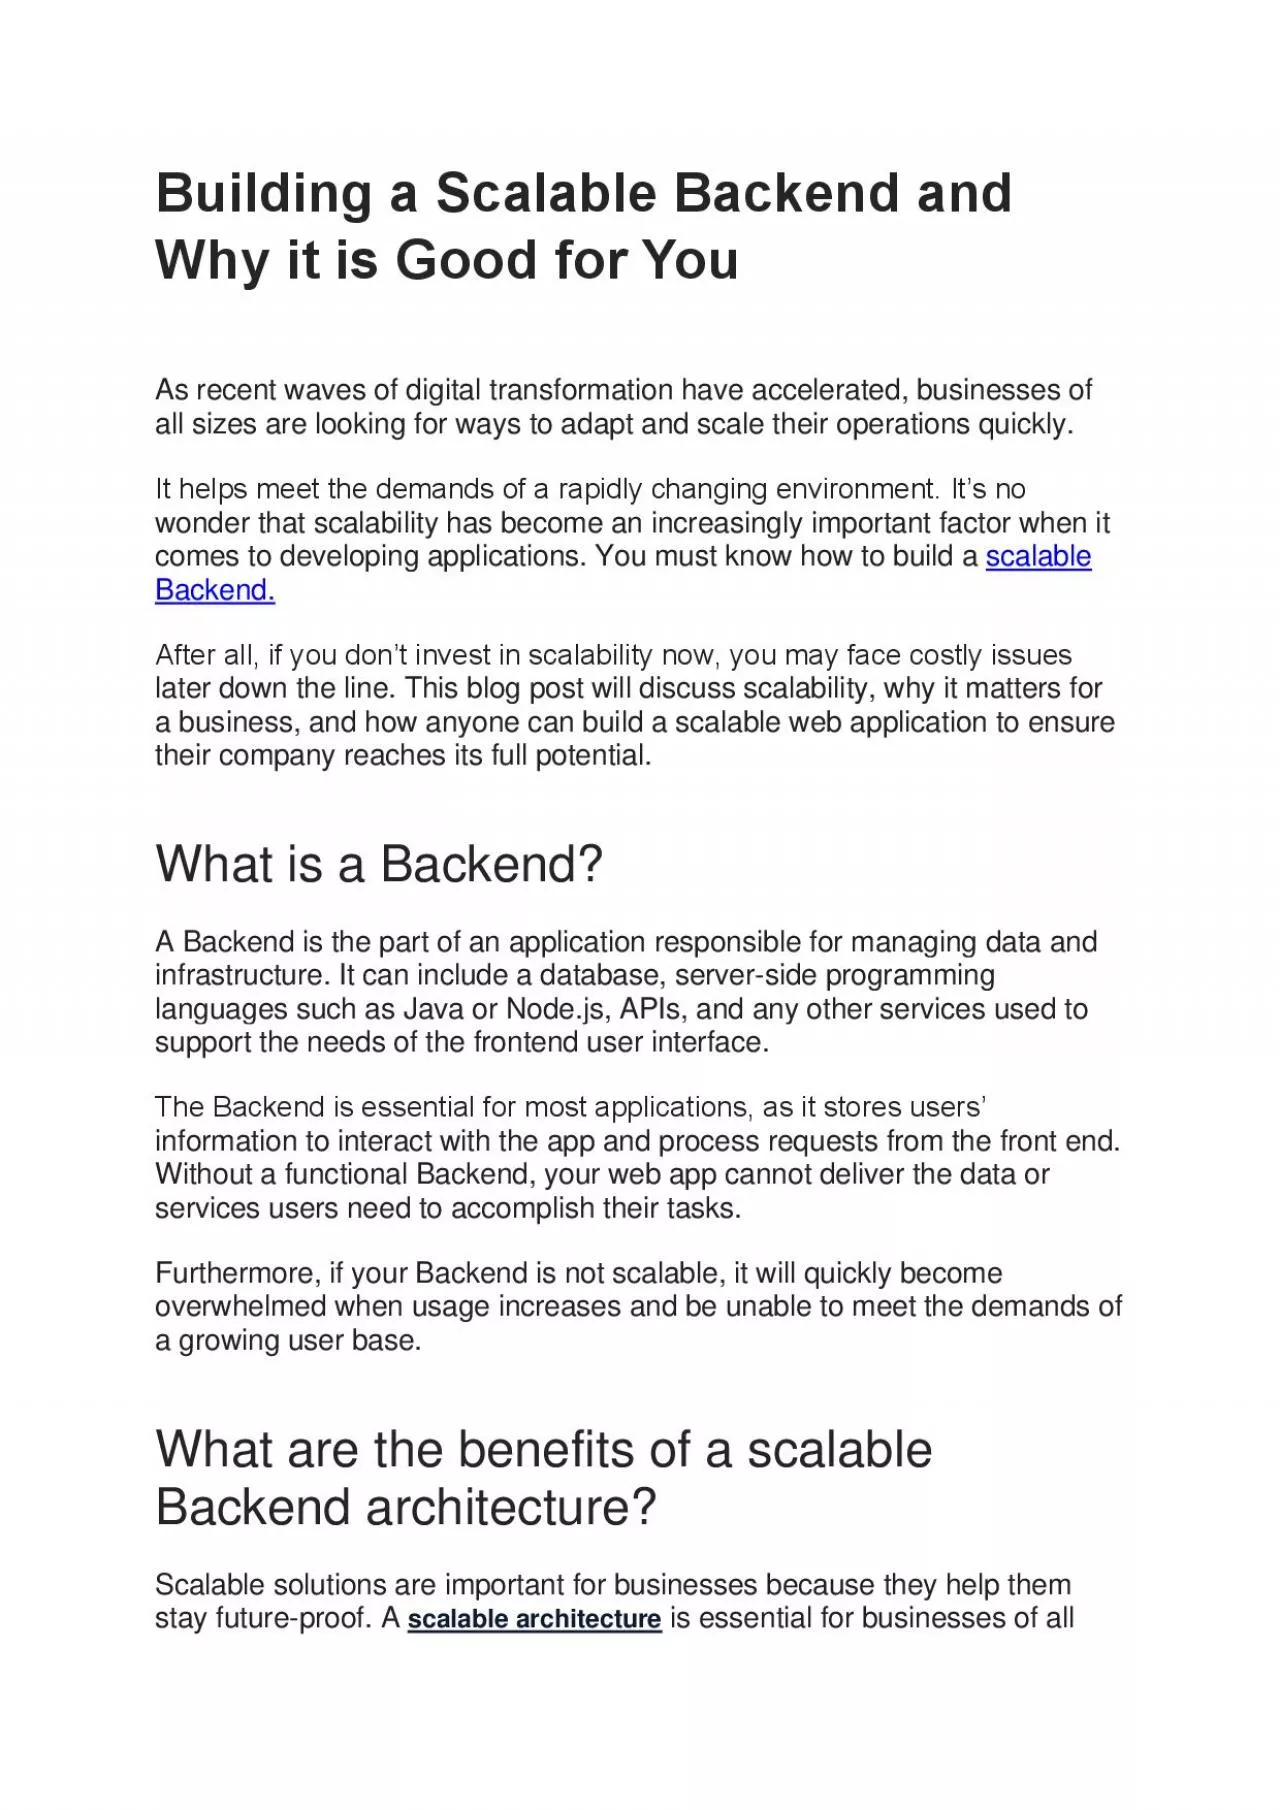 Building a Scalable Backend and Why it is Good for You